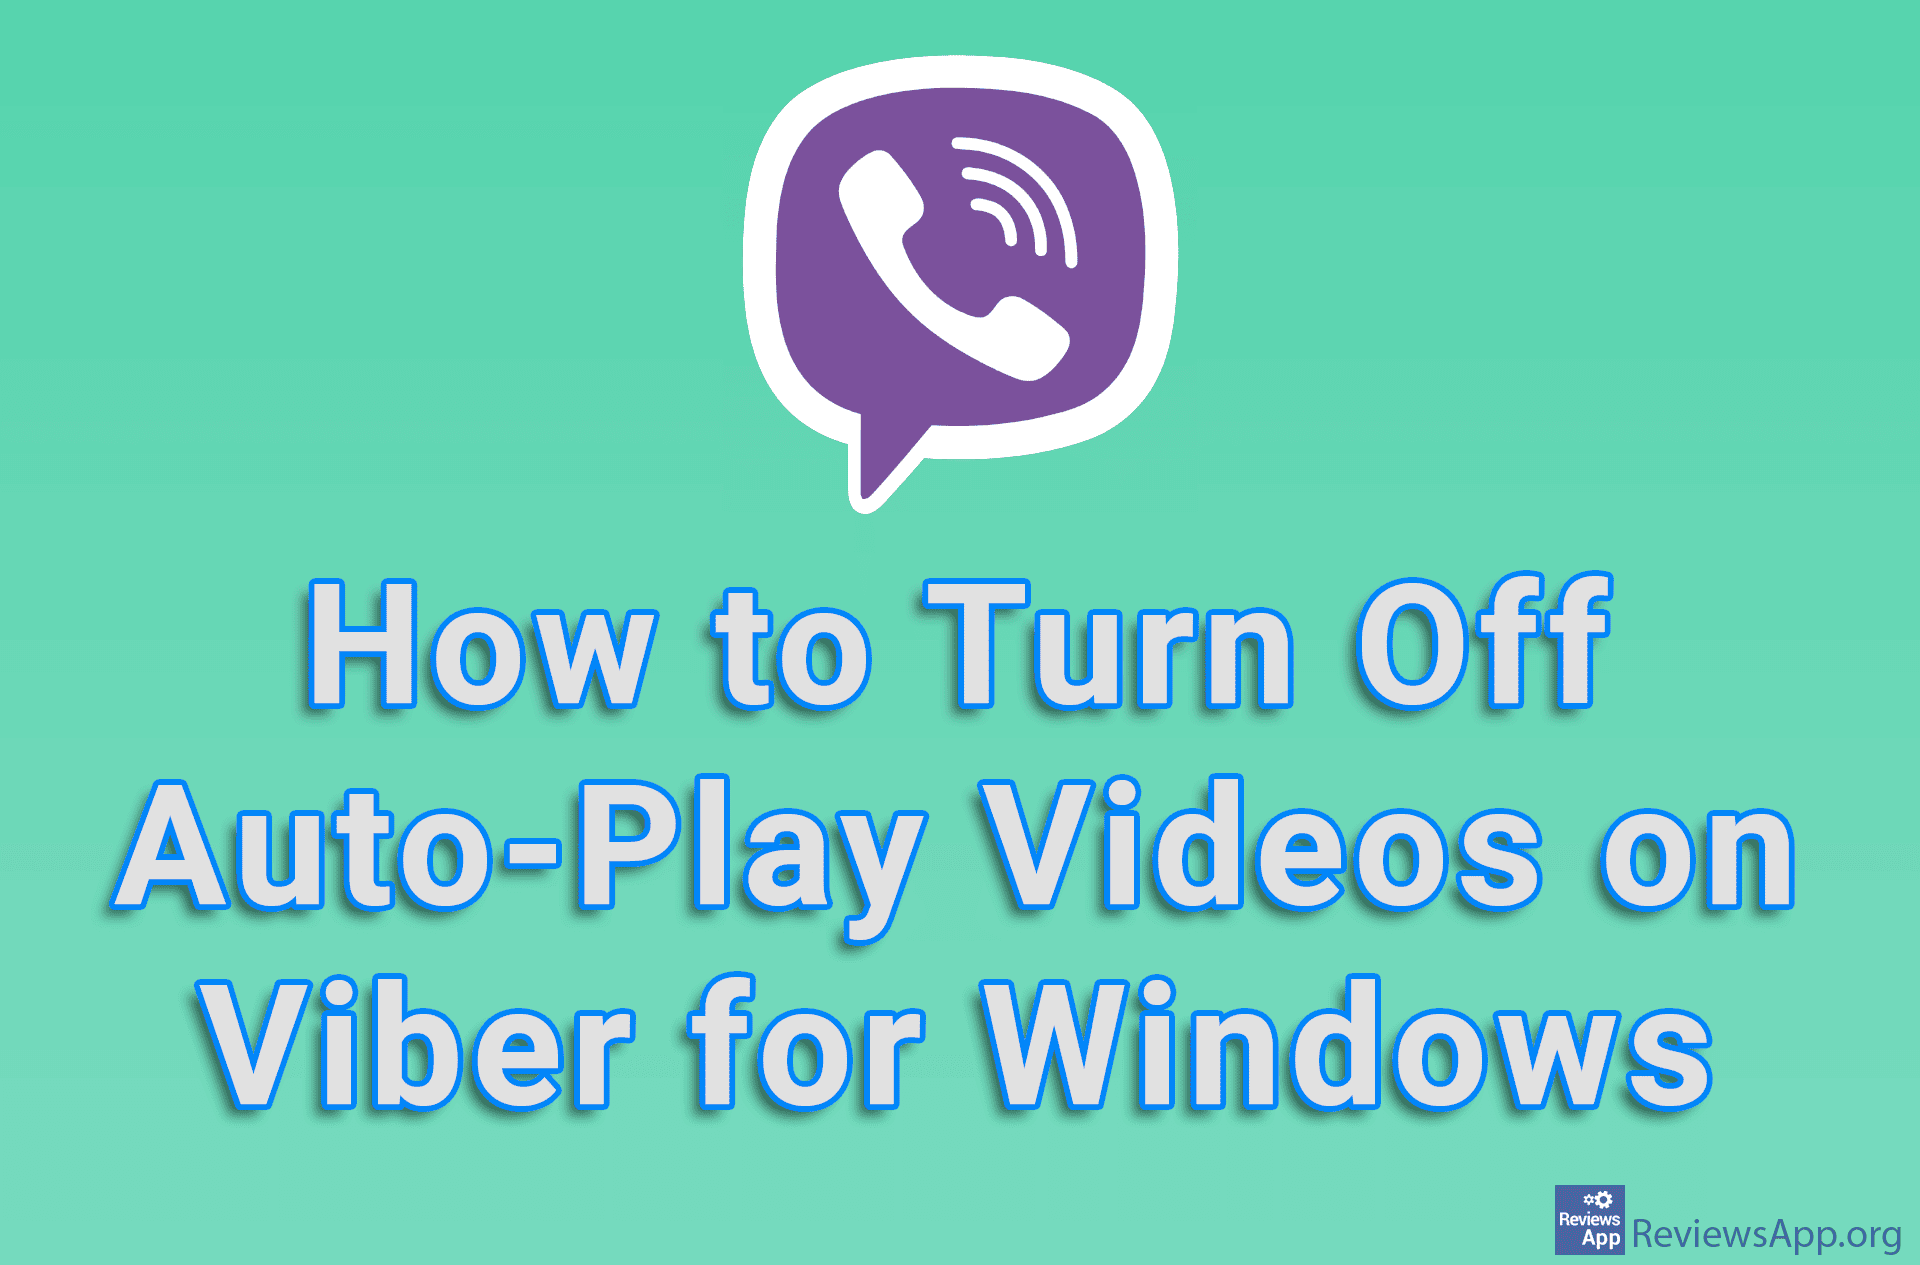 How to Turn Off Auto-Play Videos on Viber for Windows